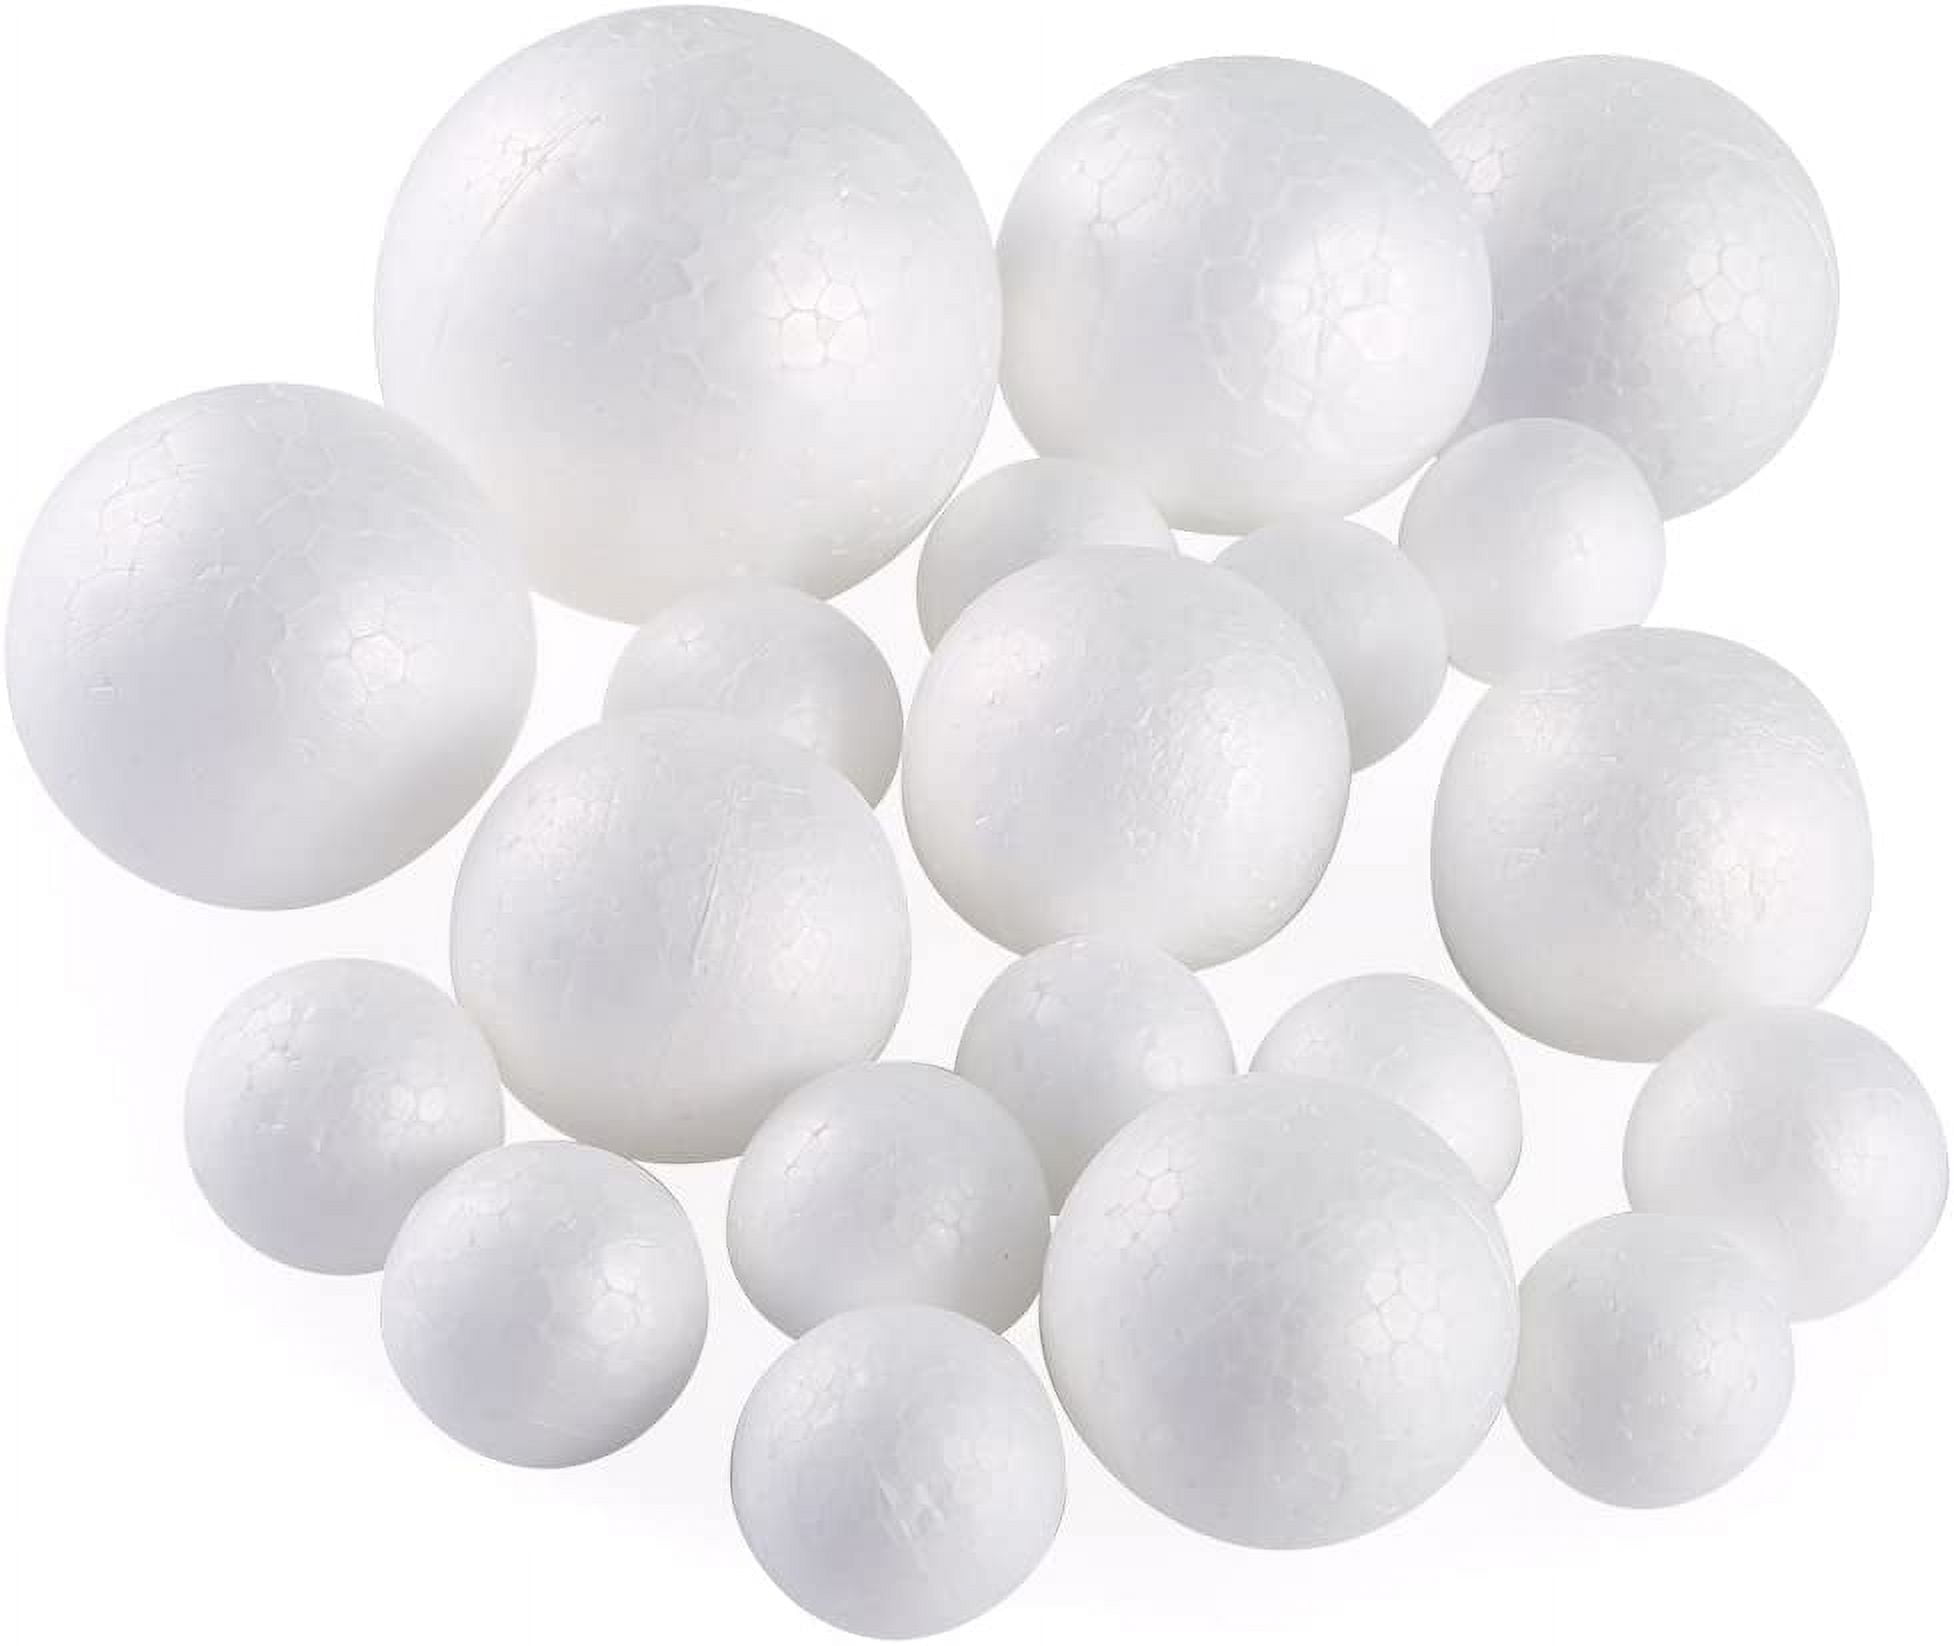 75-Pack Bulk Foam Balls for Crafts for DIY Arts and Supplies, 2